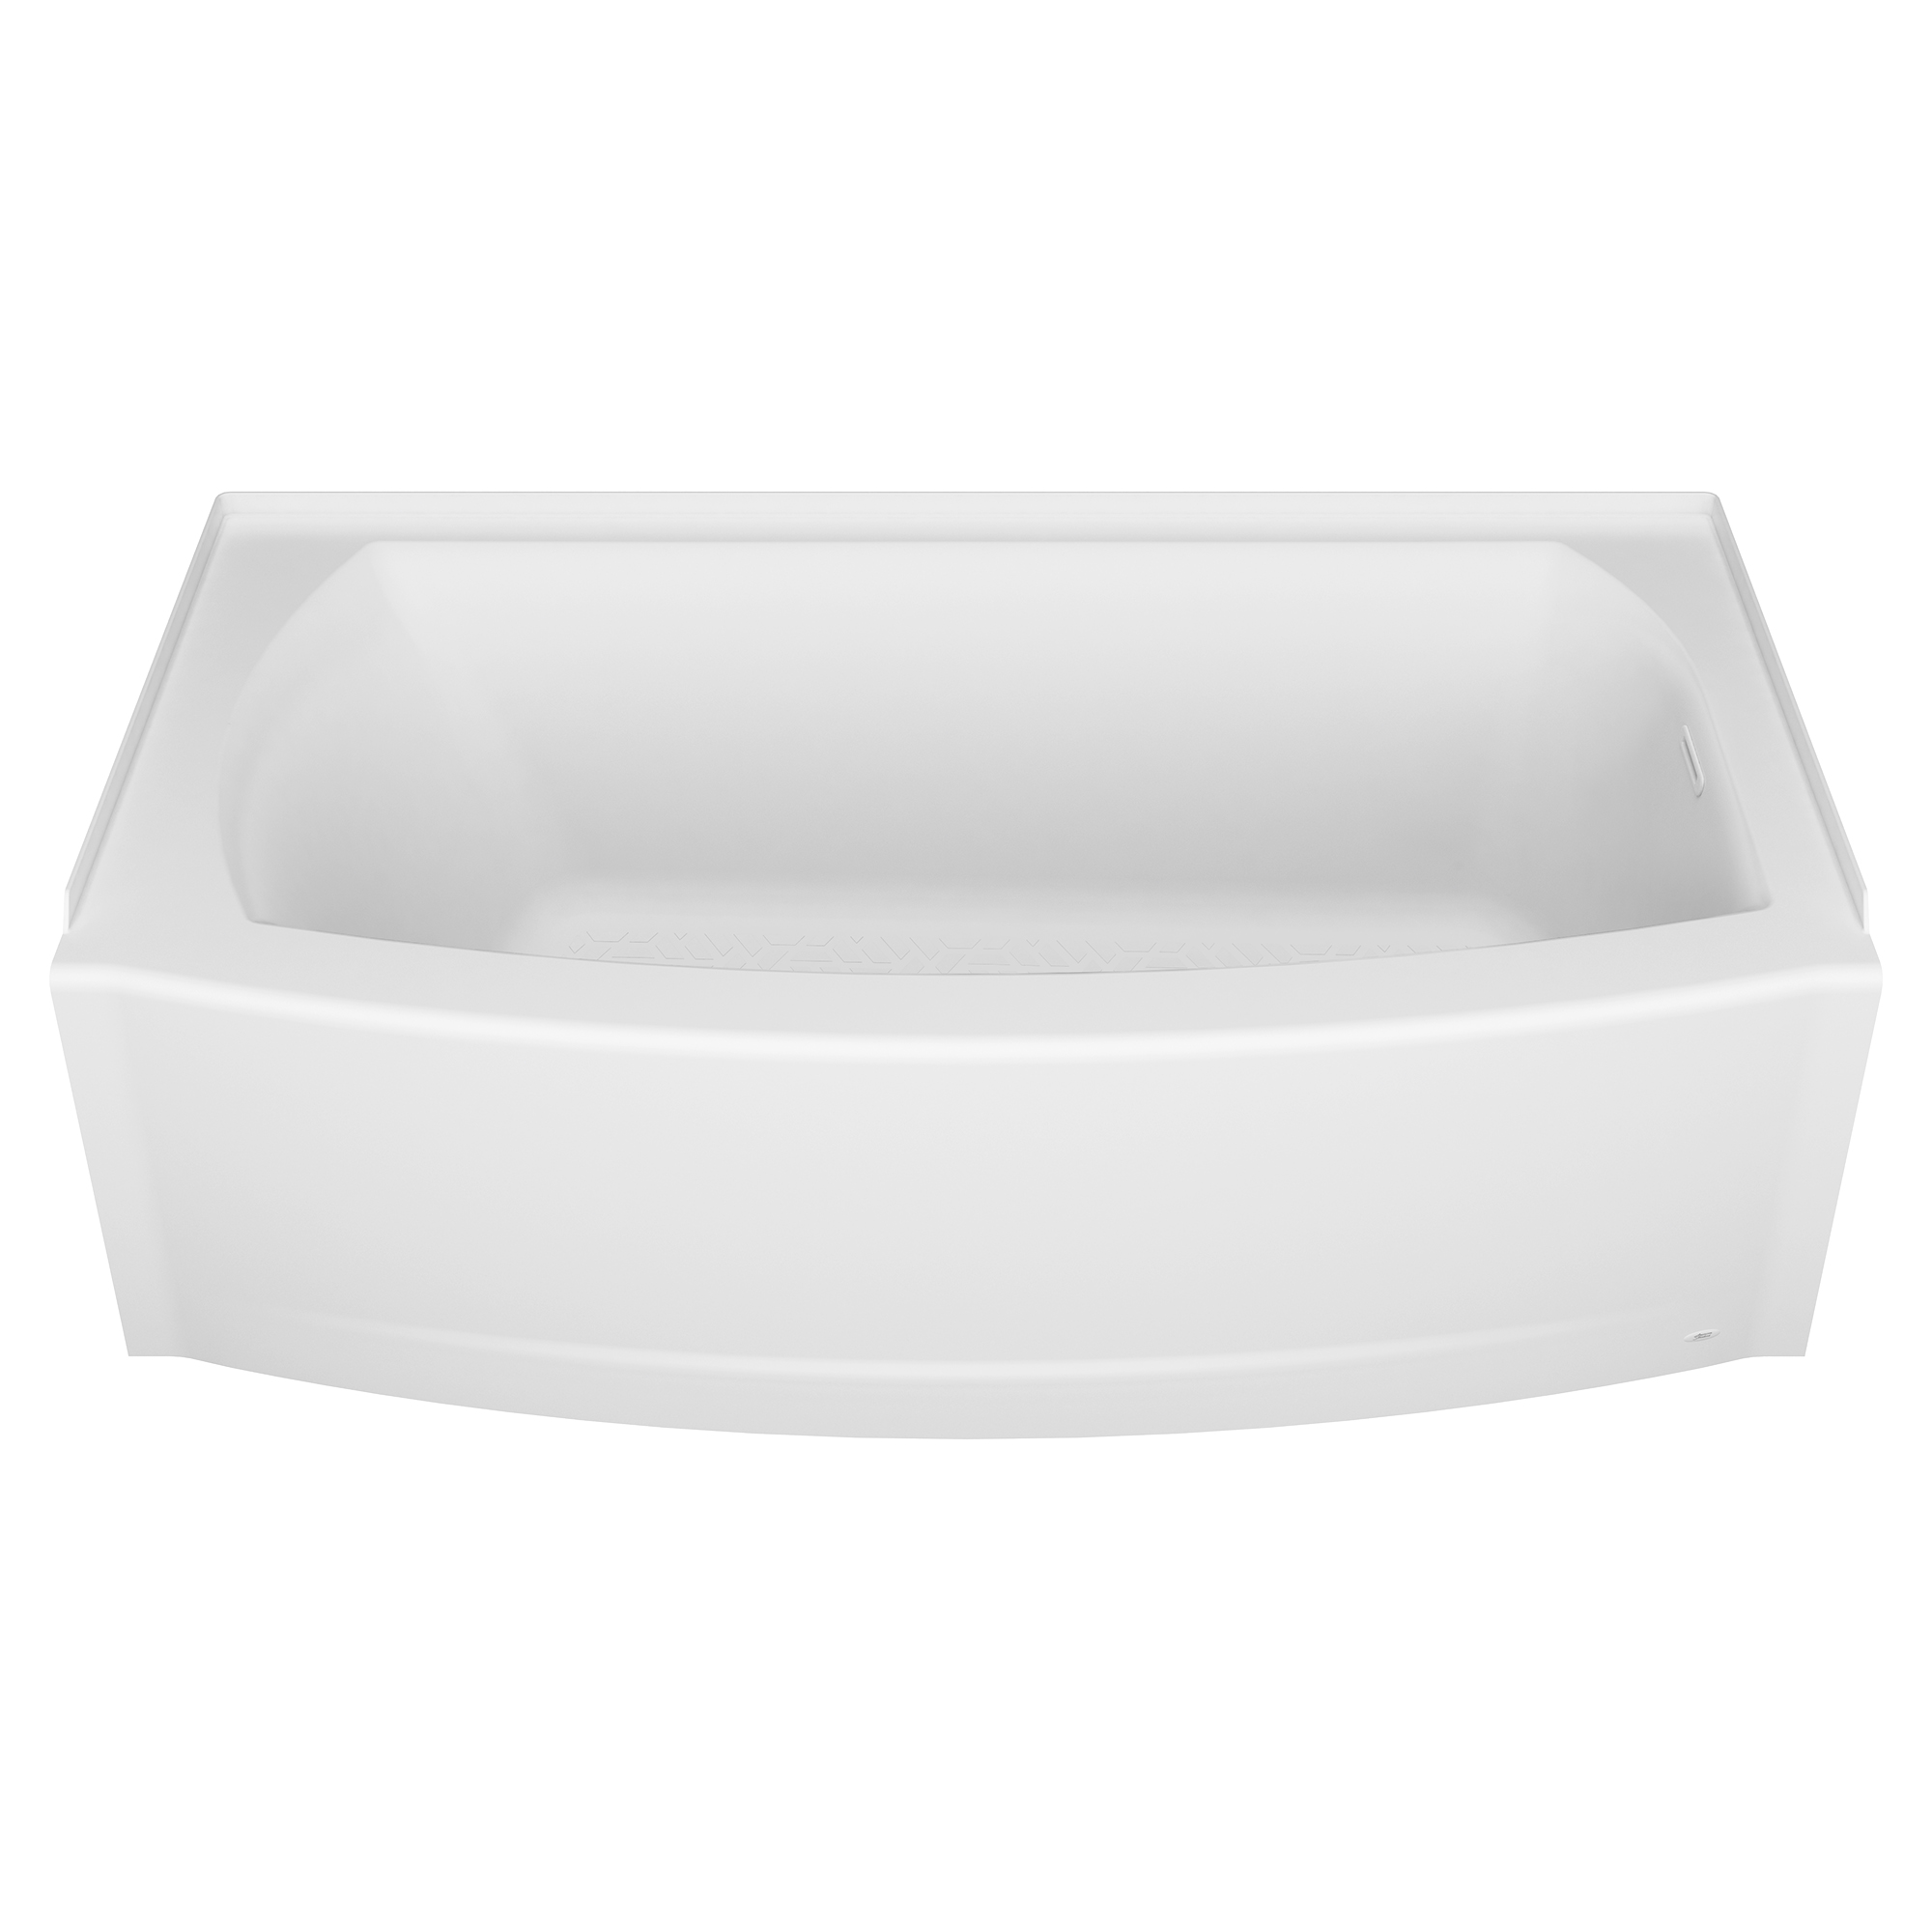 Ovation Curve™ 5x30-inch Integral Apron Bathtub with Right-hand Outlet with Deep Soak Drain